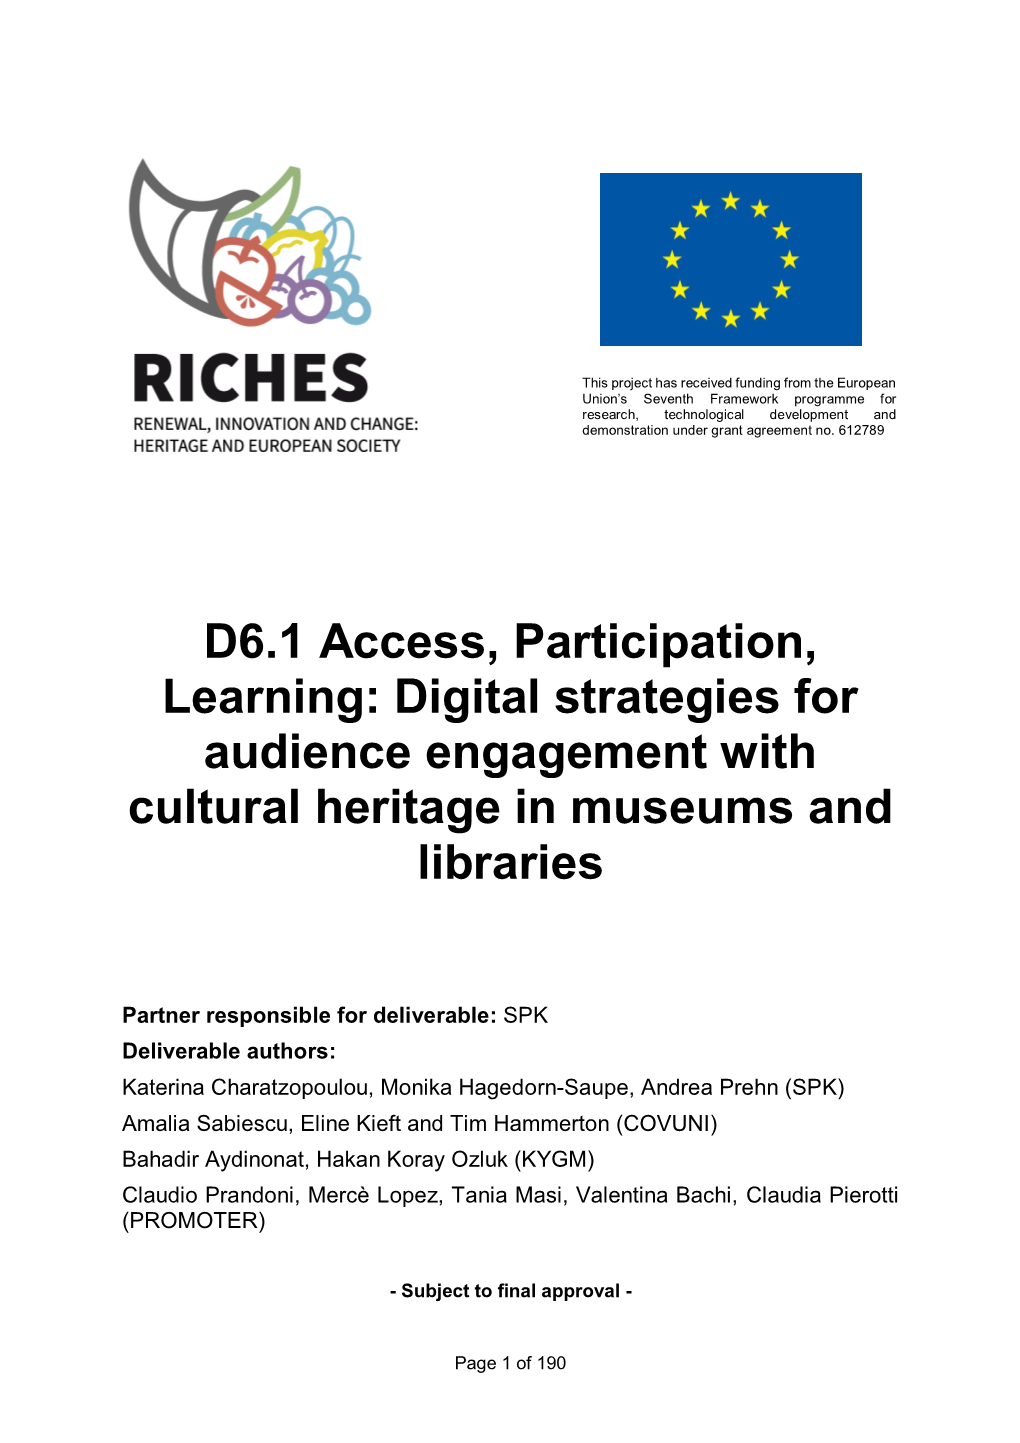 D6.1 Access, Participation, Learning: Digital Strategies for Audience Engagement with Cultural Heritage in Museums and Libraries